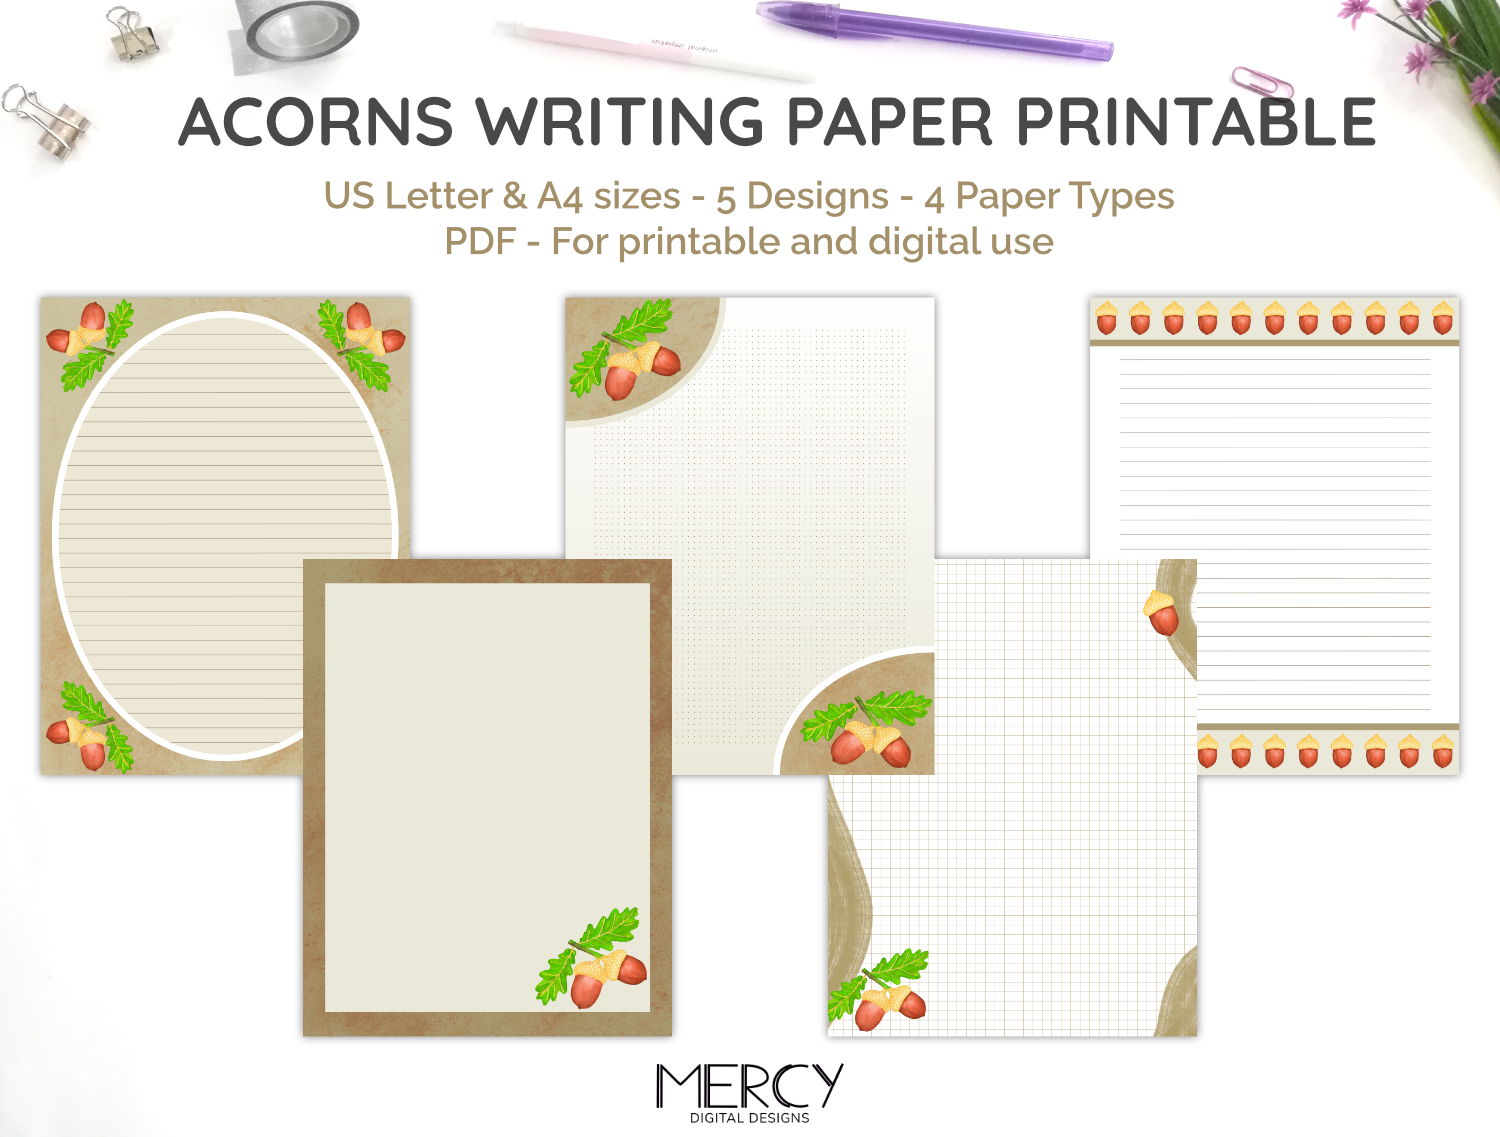 Flowered Letter Writing Pages, Printable Stationery, Pen Pal Page, Journaling  Paper With Flowers, Digital Journal Paper, Printable Paper 